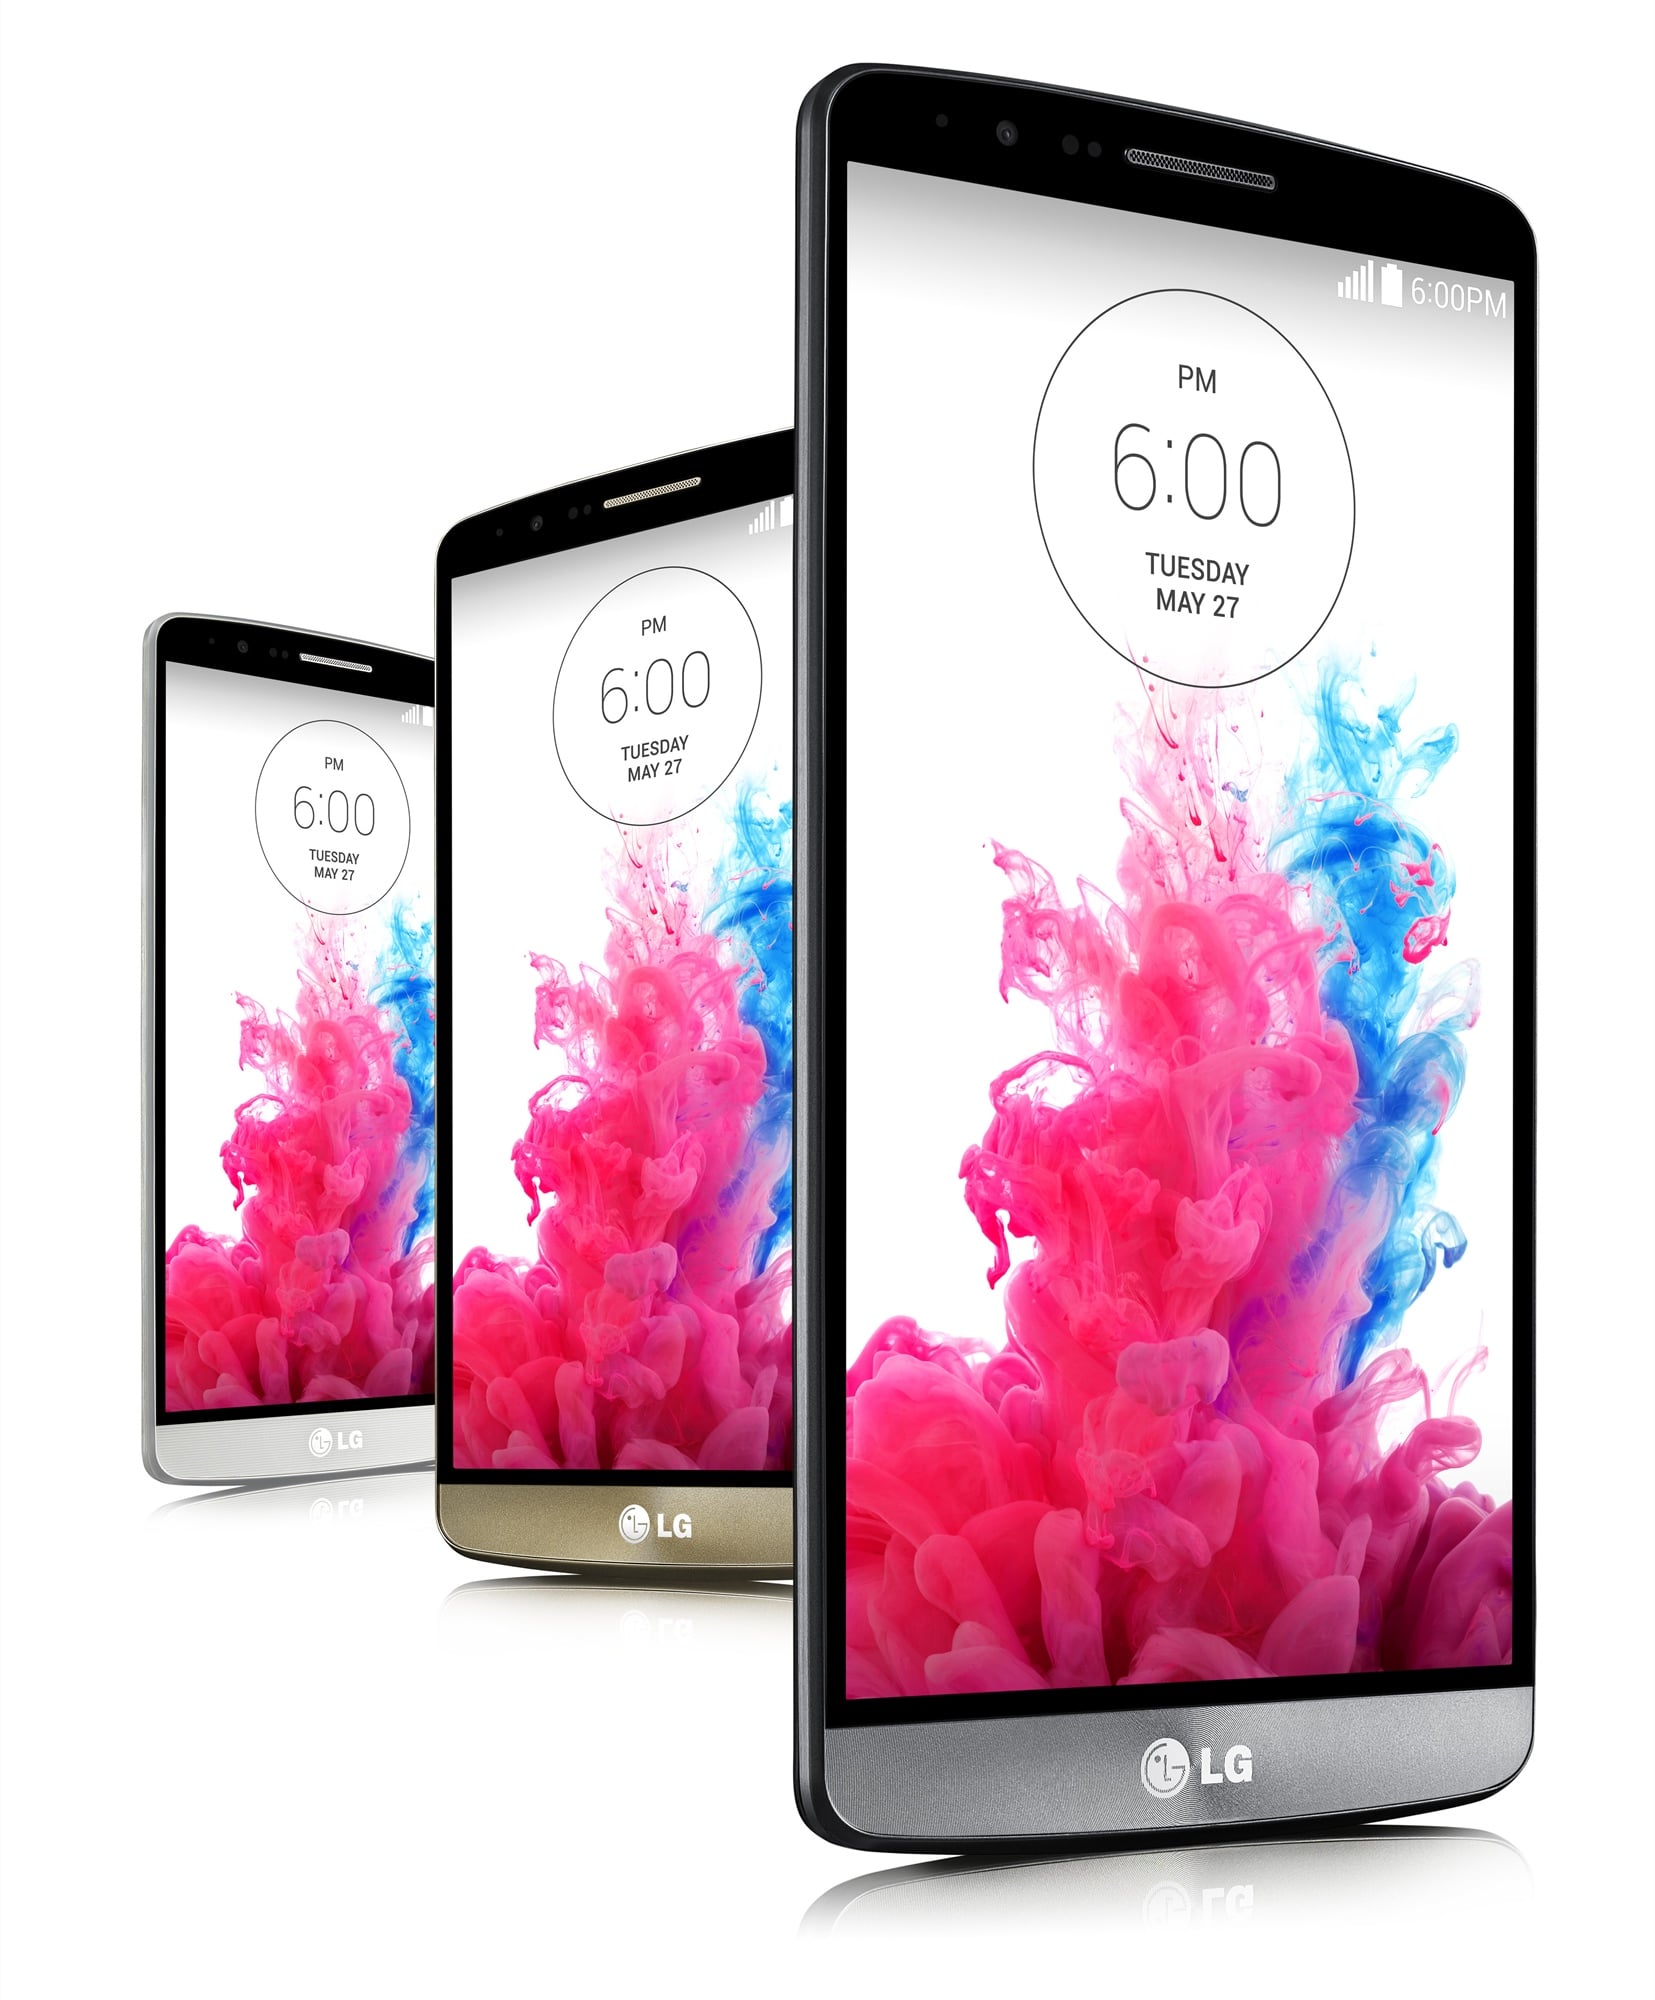 LG G3 - Full phone specifications